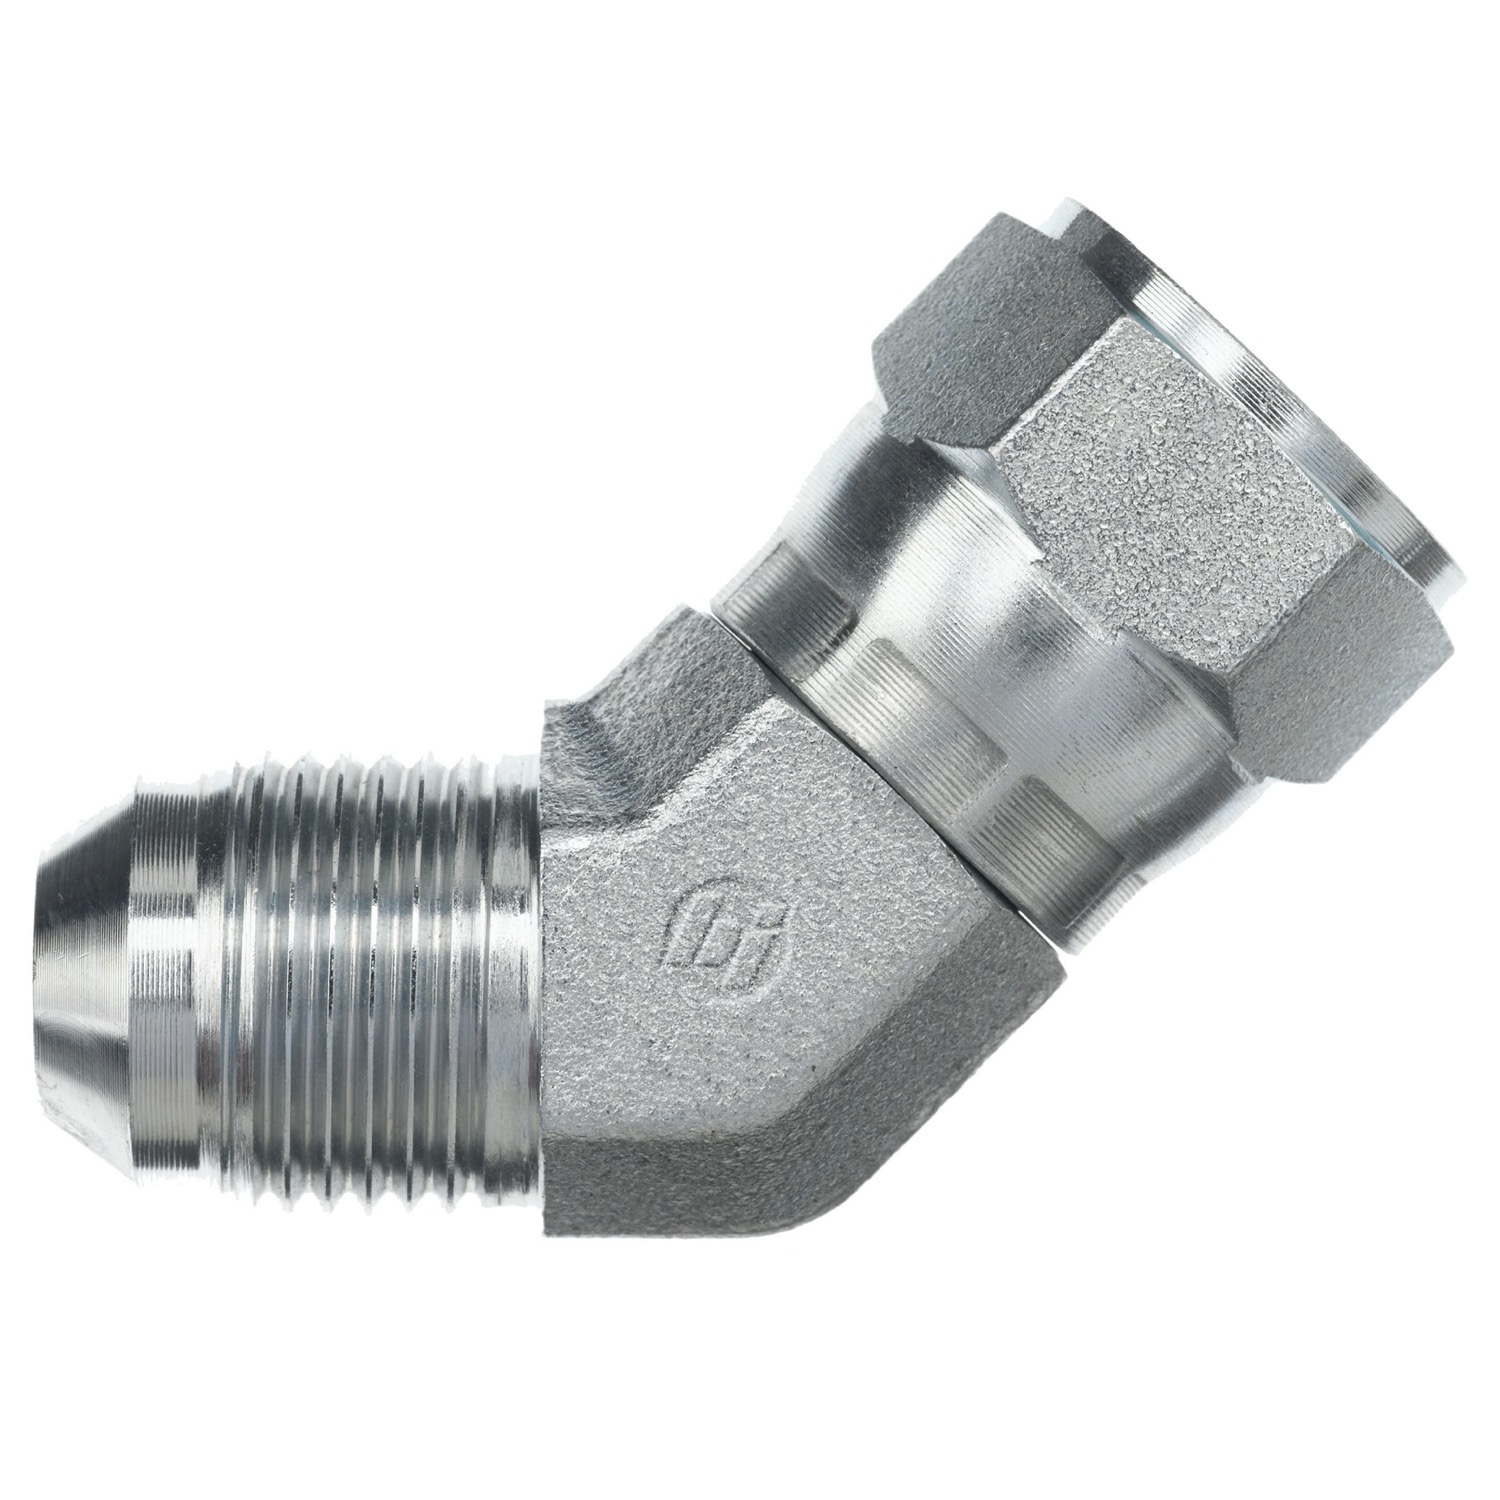 Hydraulic Hose Adapters - Elbow 45° Fitting, JIC 37° Flare to JIC 37° Flare, 6502 Series